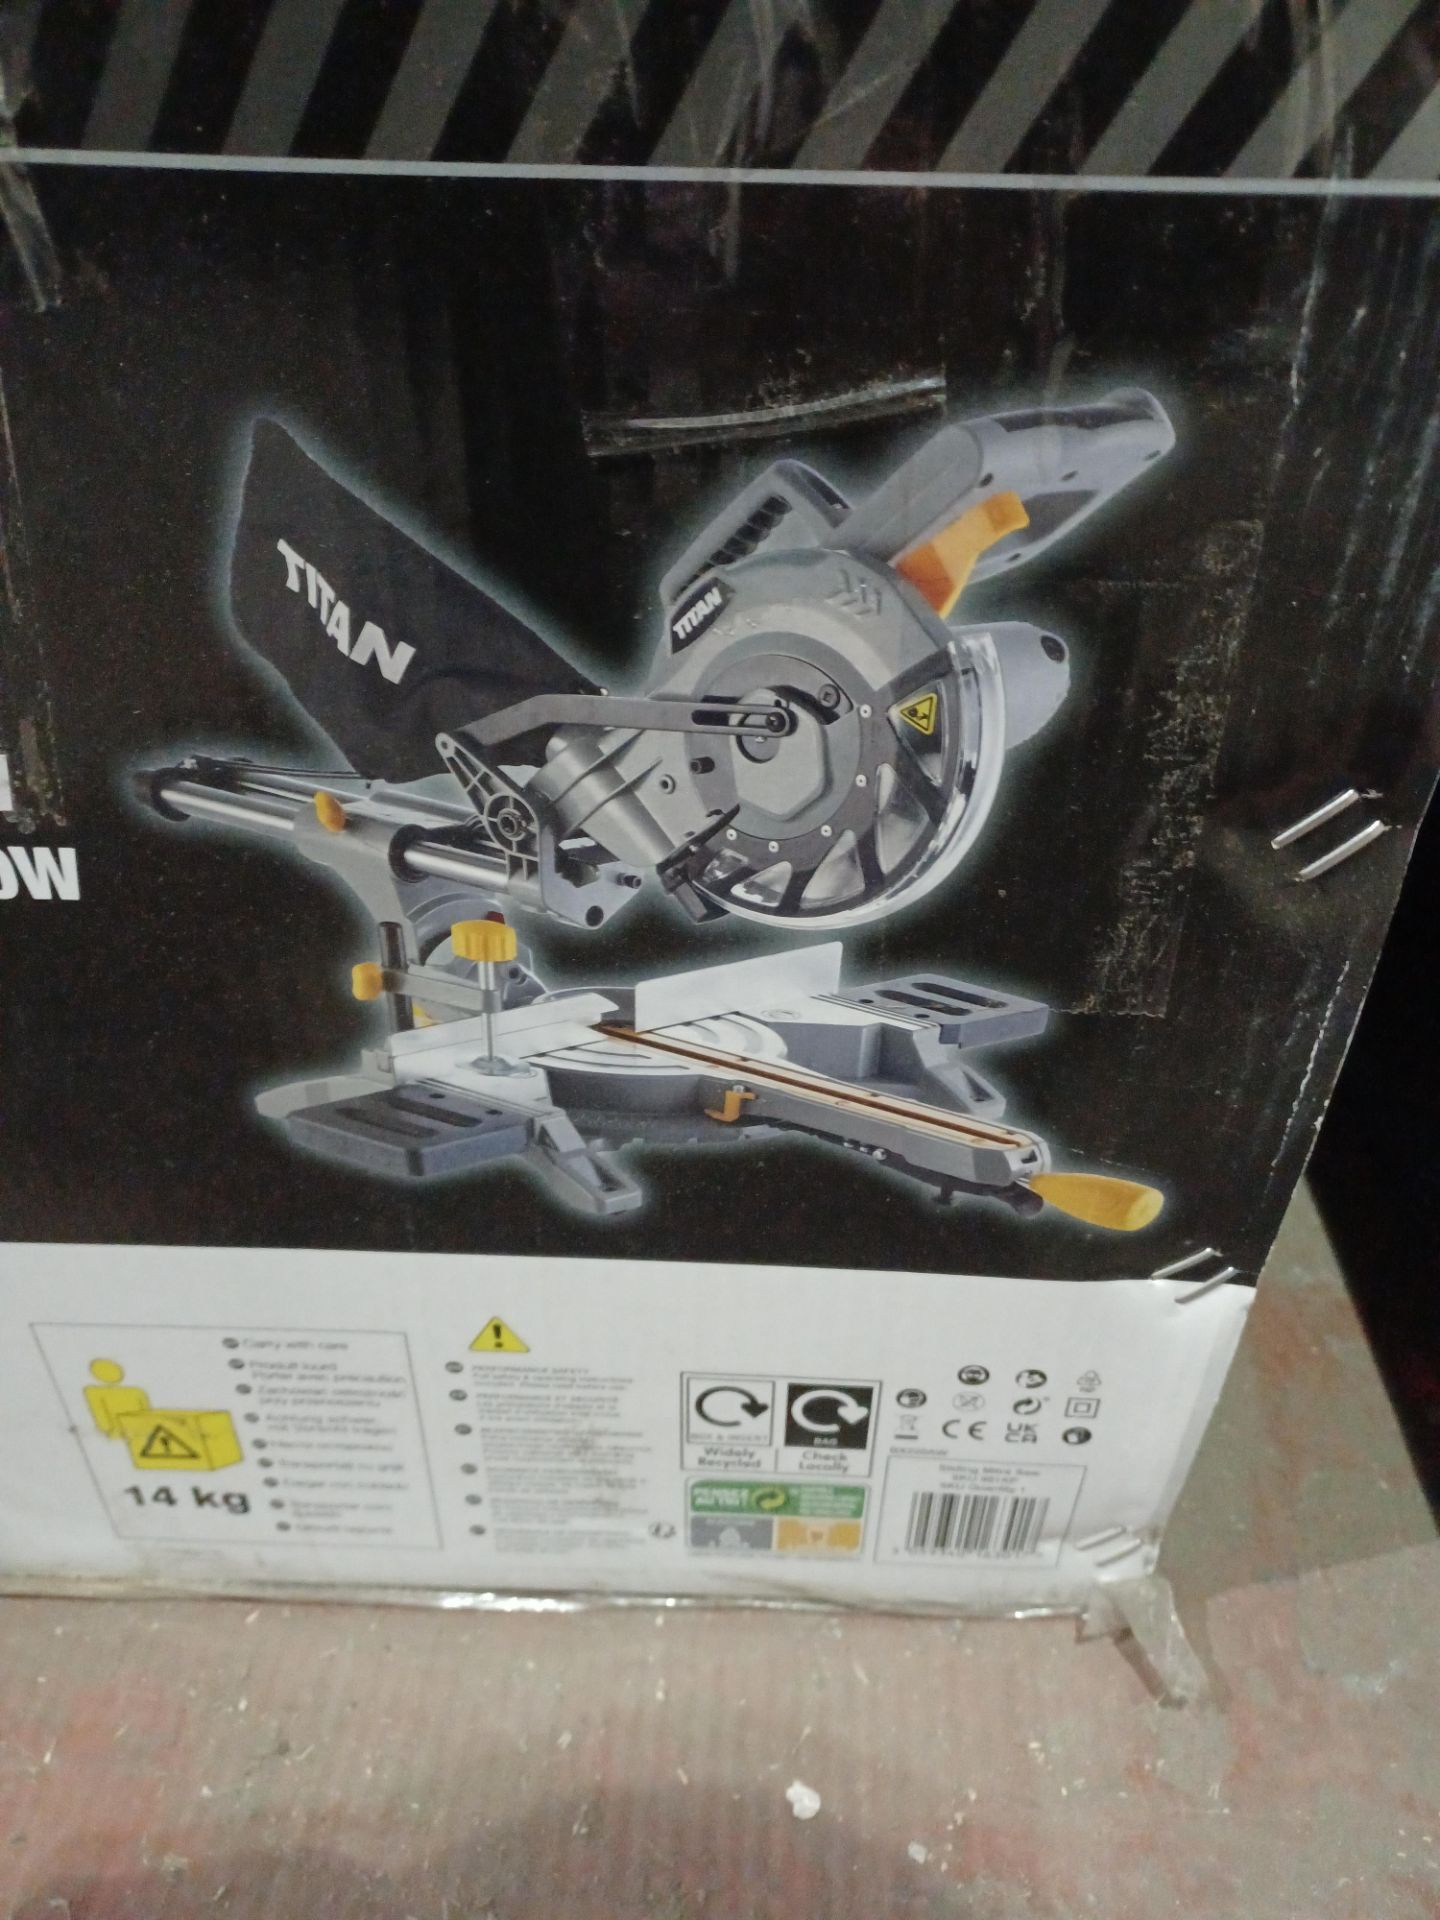 TITAN 210MM SLIDING MITRE SAW. 1500W. BOXED. ROW 2. TESTED WORKING